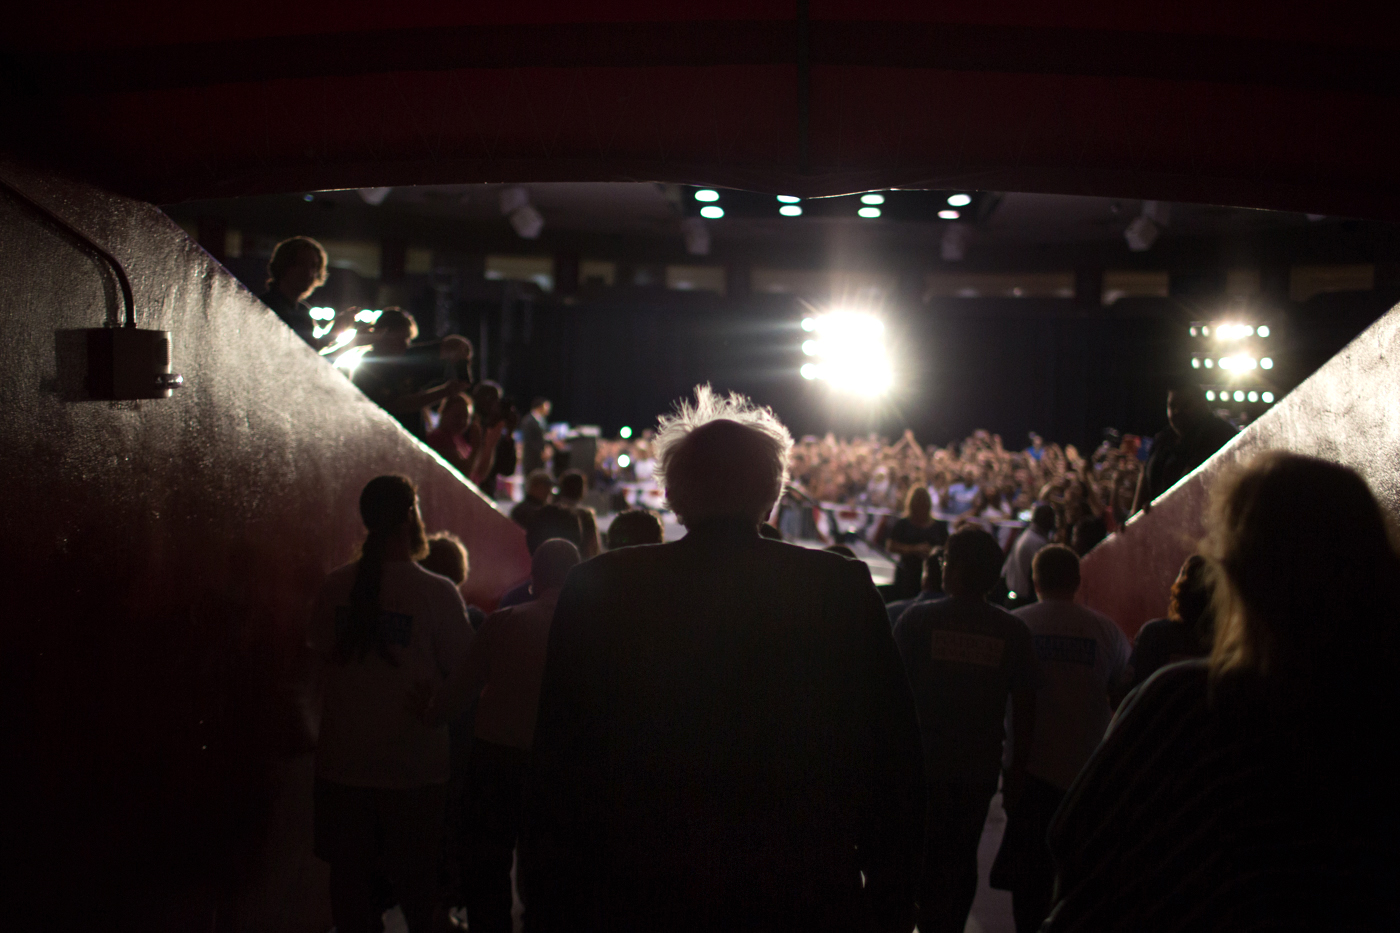 Sen. Bernie Sanders enters the University of Houston Arena for a rally, July 19, 2015